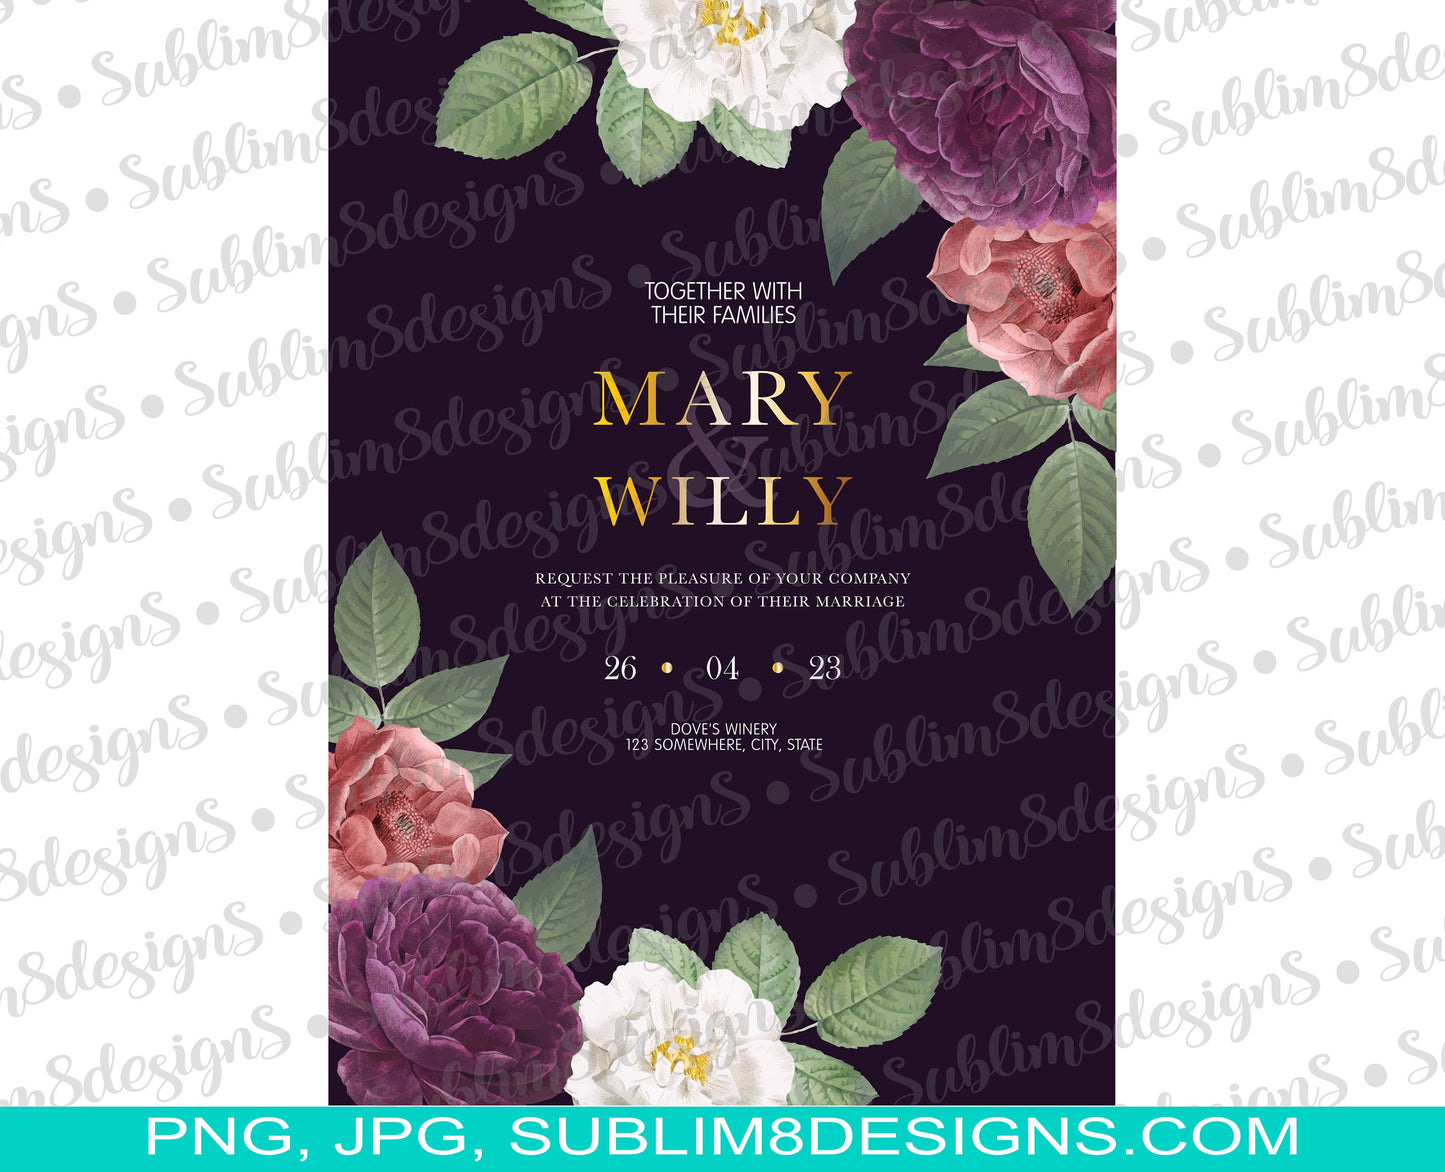 Purple Floral Wedding Invite, Thank You Card, RSVP Card, Table Card, Remember The Date Card JPG and PDF Only